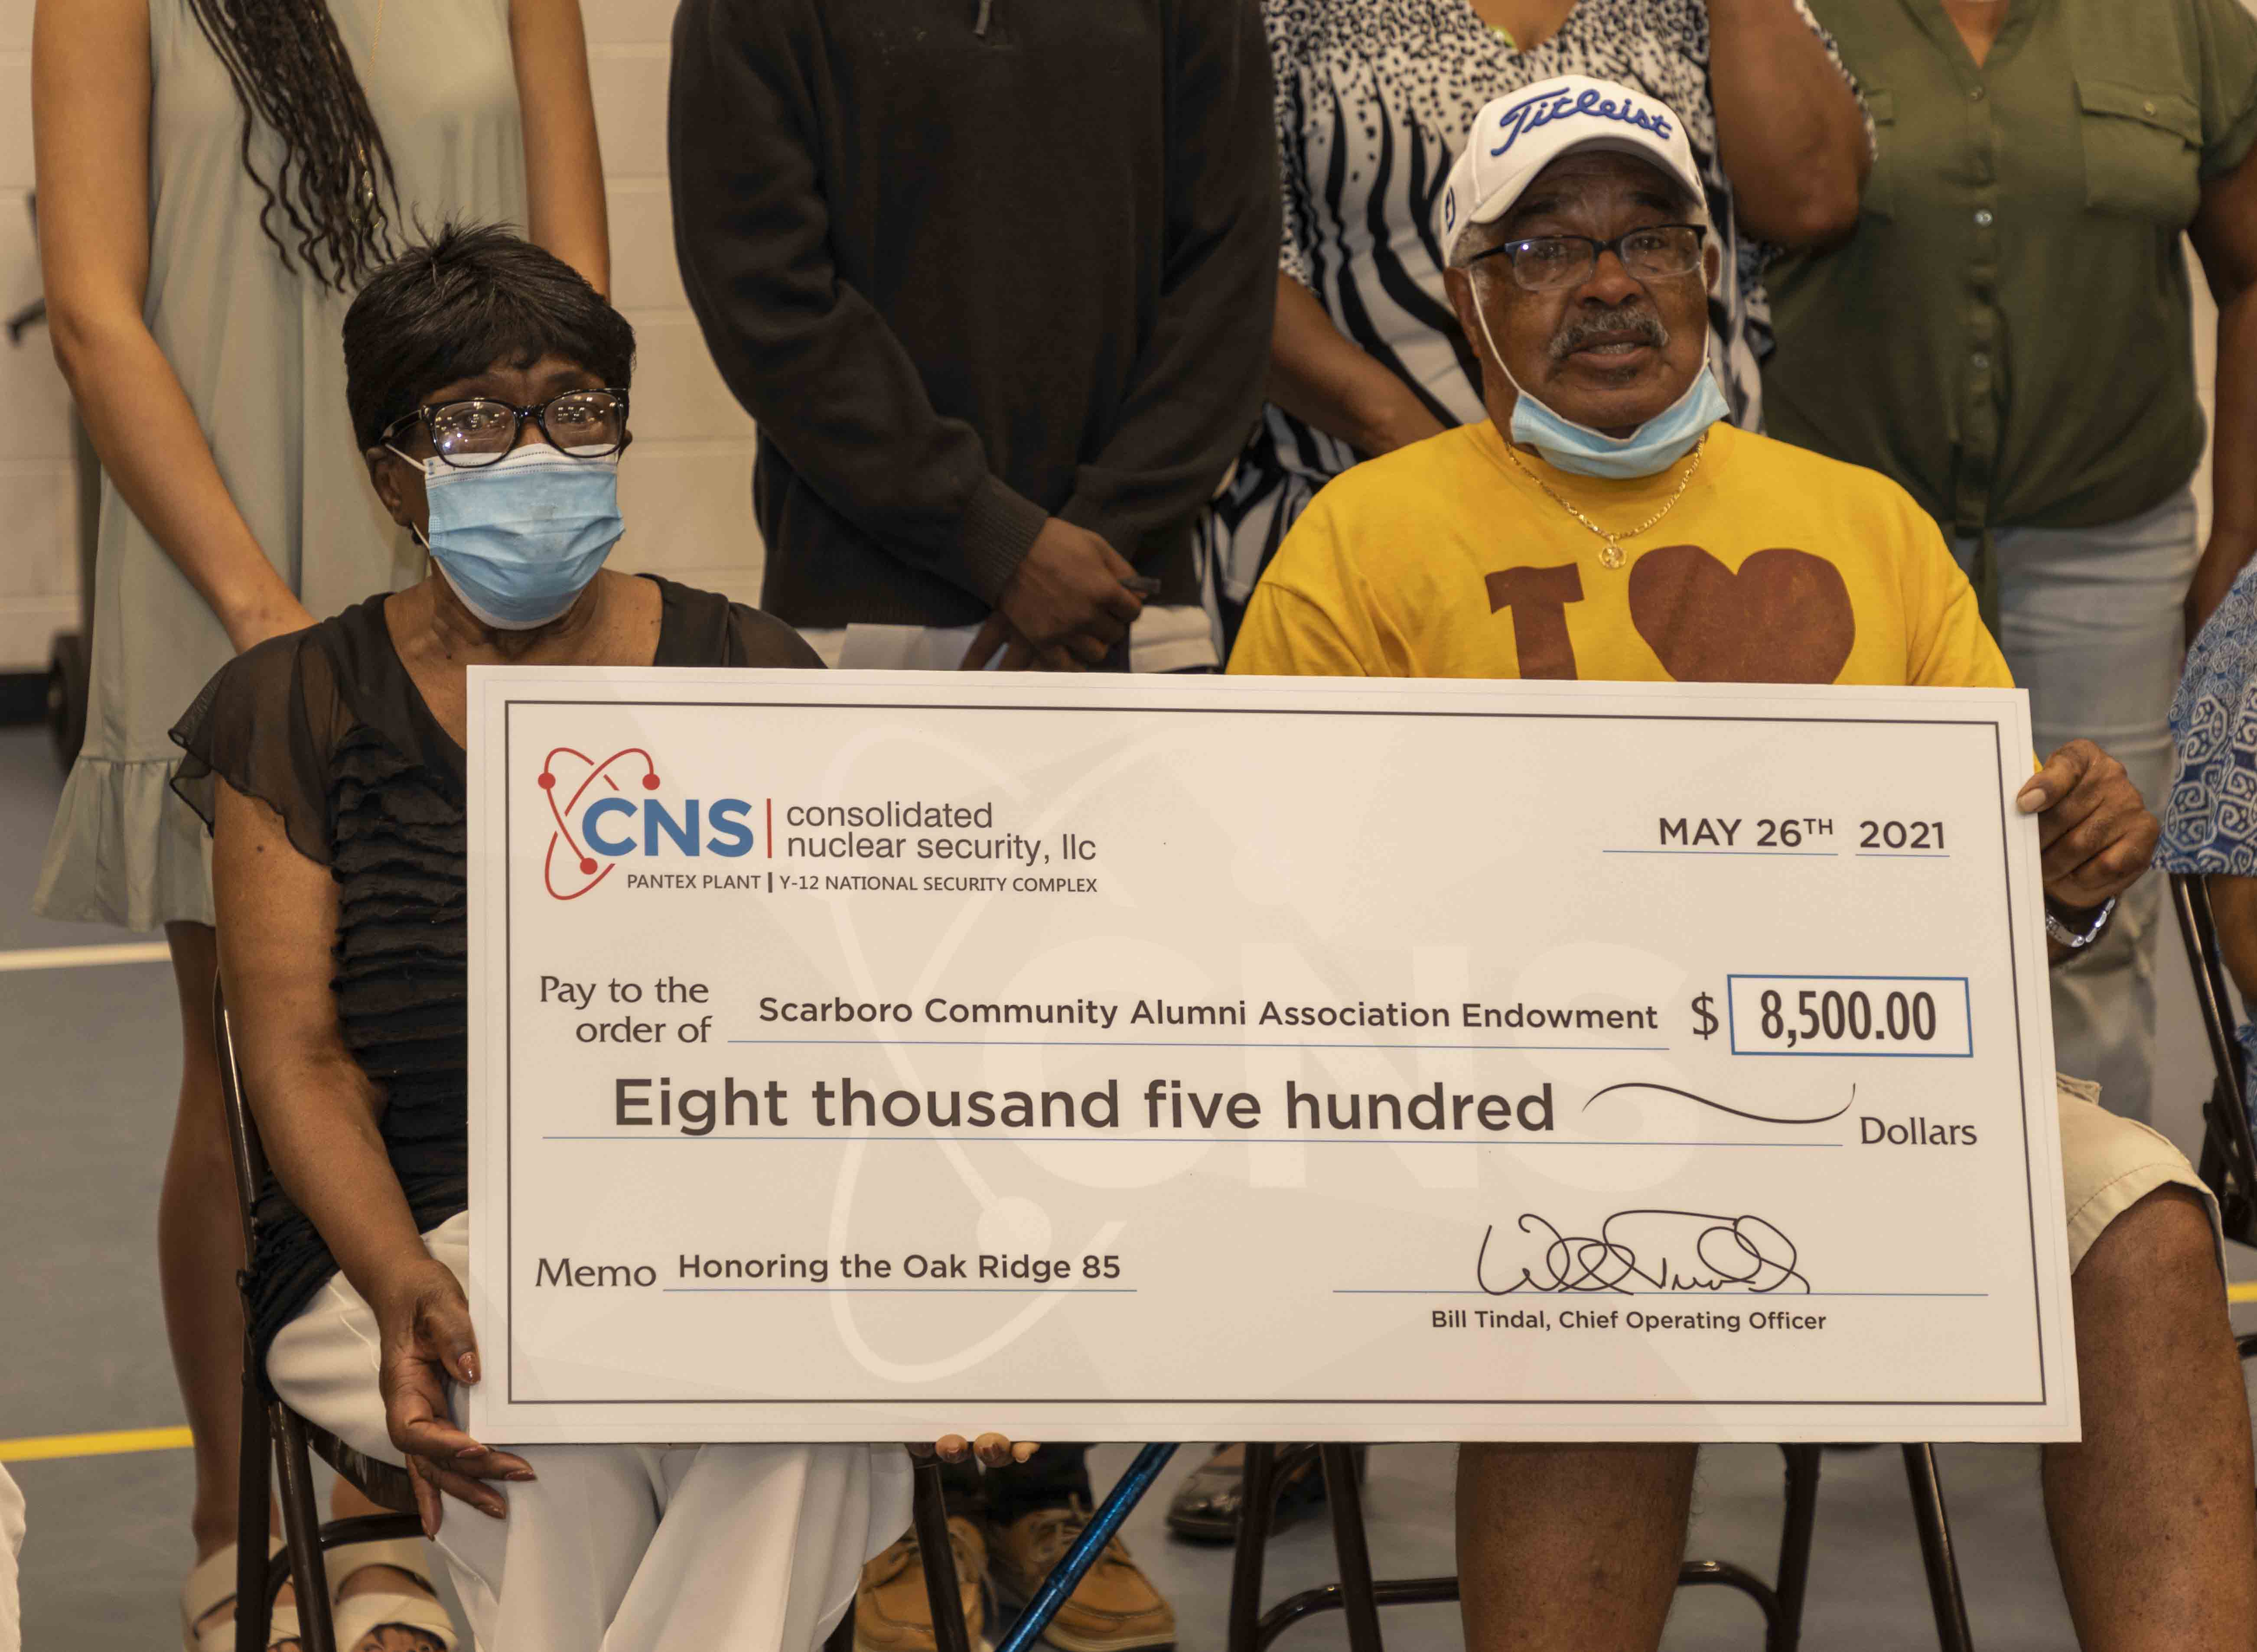 Dorothy Kirk Lewis and L. C. Gipson, members of the Oak Ridge 85, hold the check representing the $8,500 donation from Consolidated Nuclear Security given in their honor.